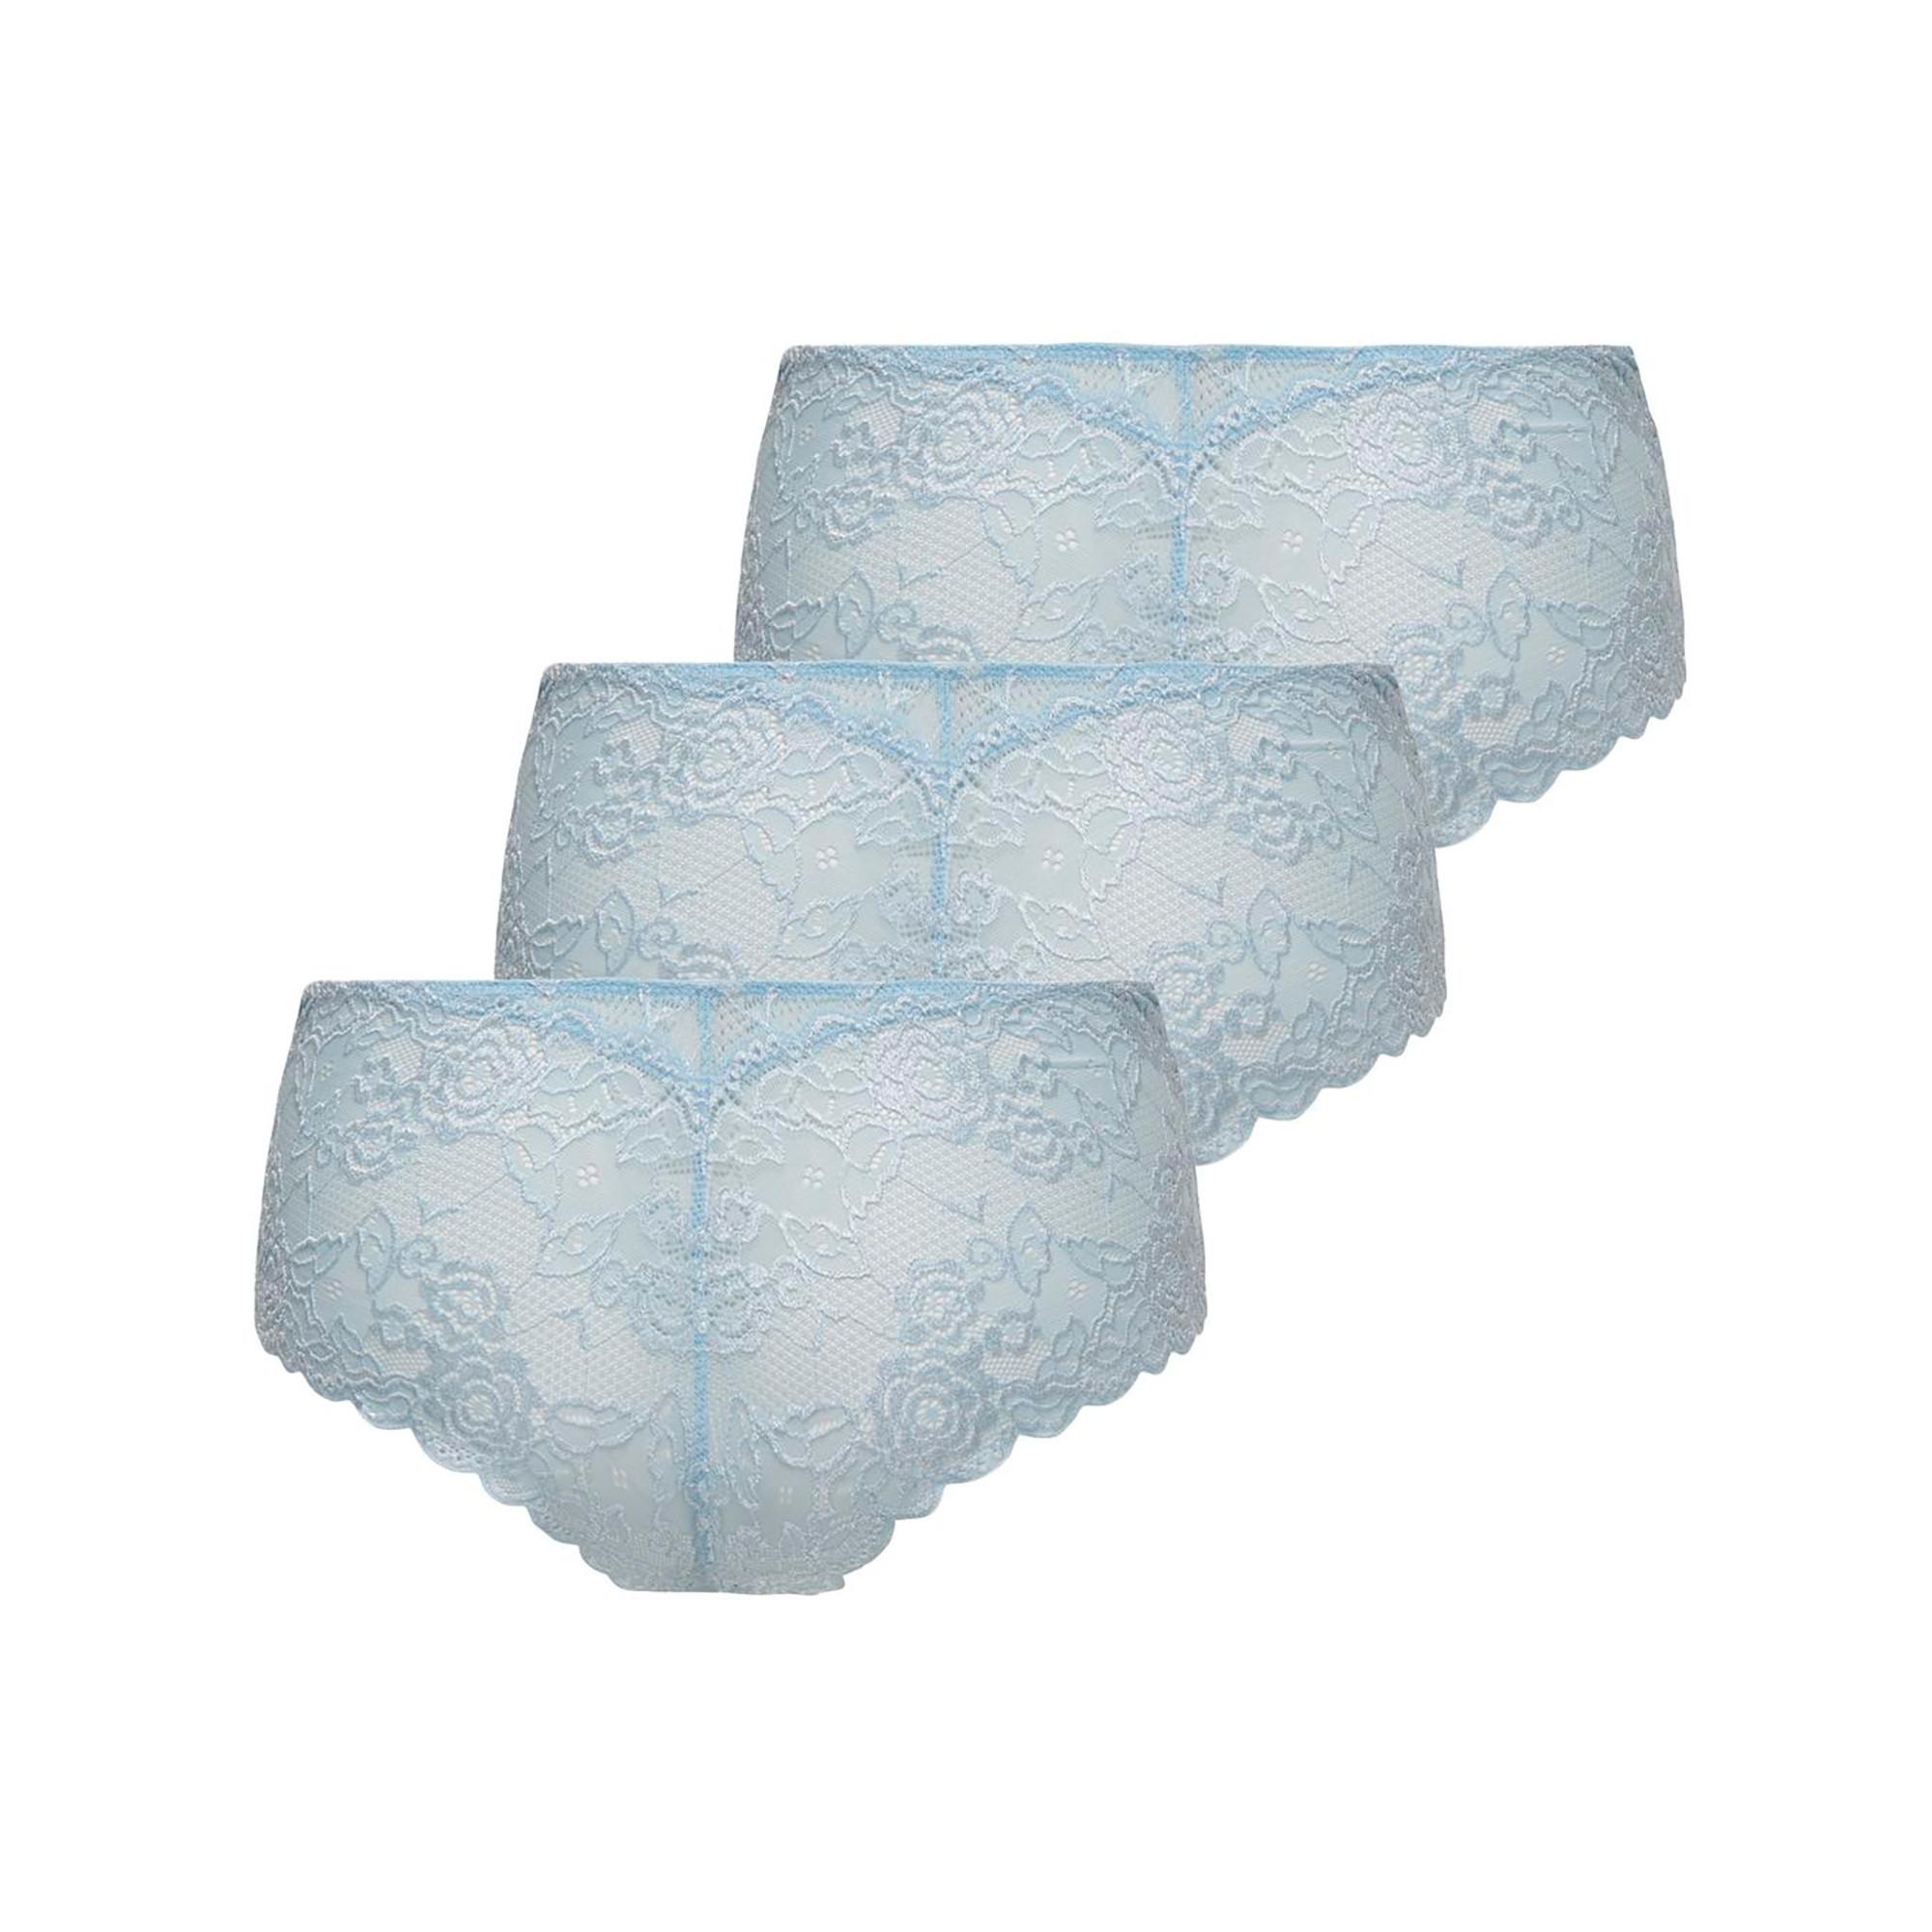 Only Lingerie Chloe Lace Skin Brief 3-Pack Hipster 